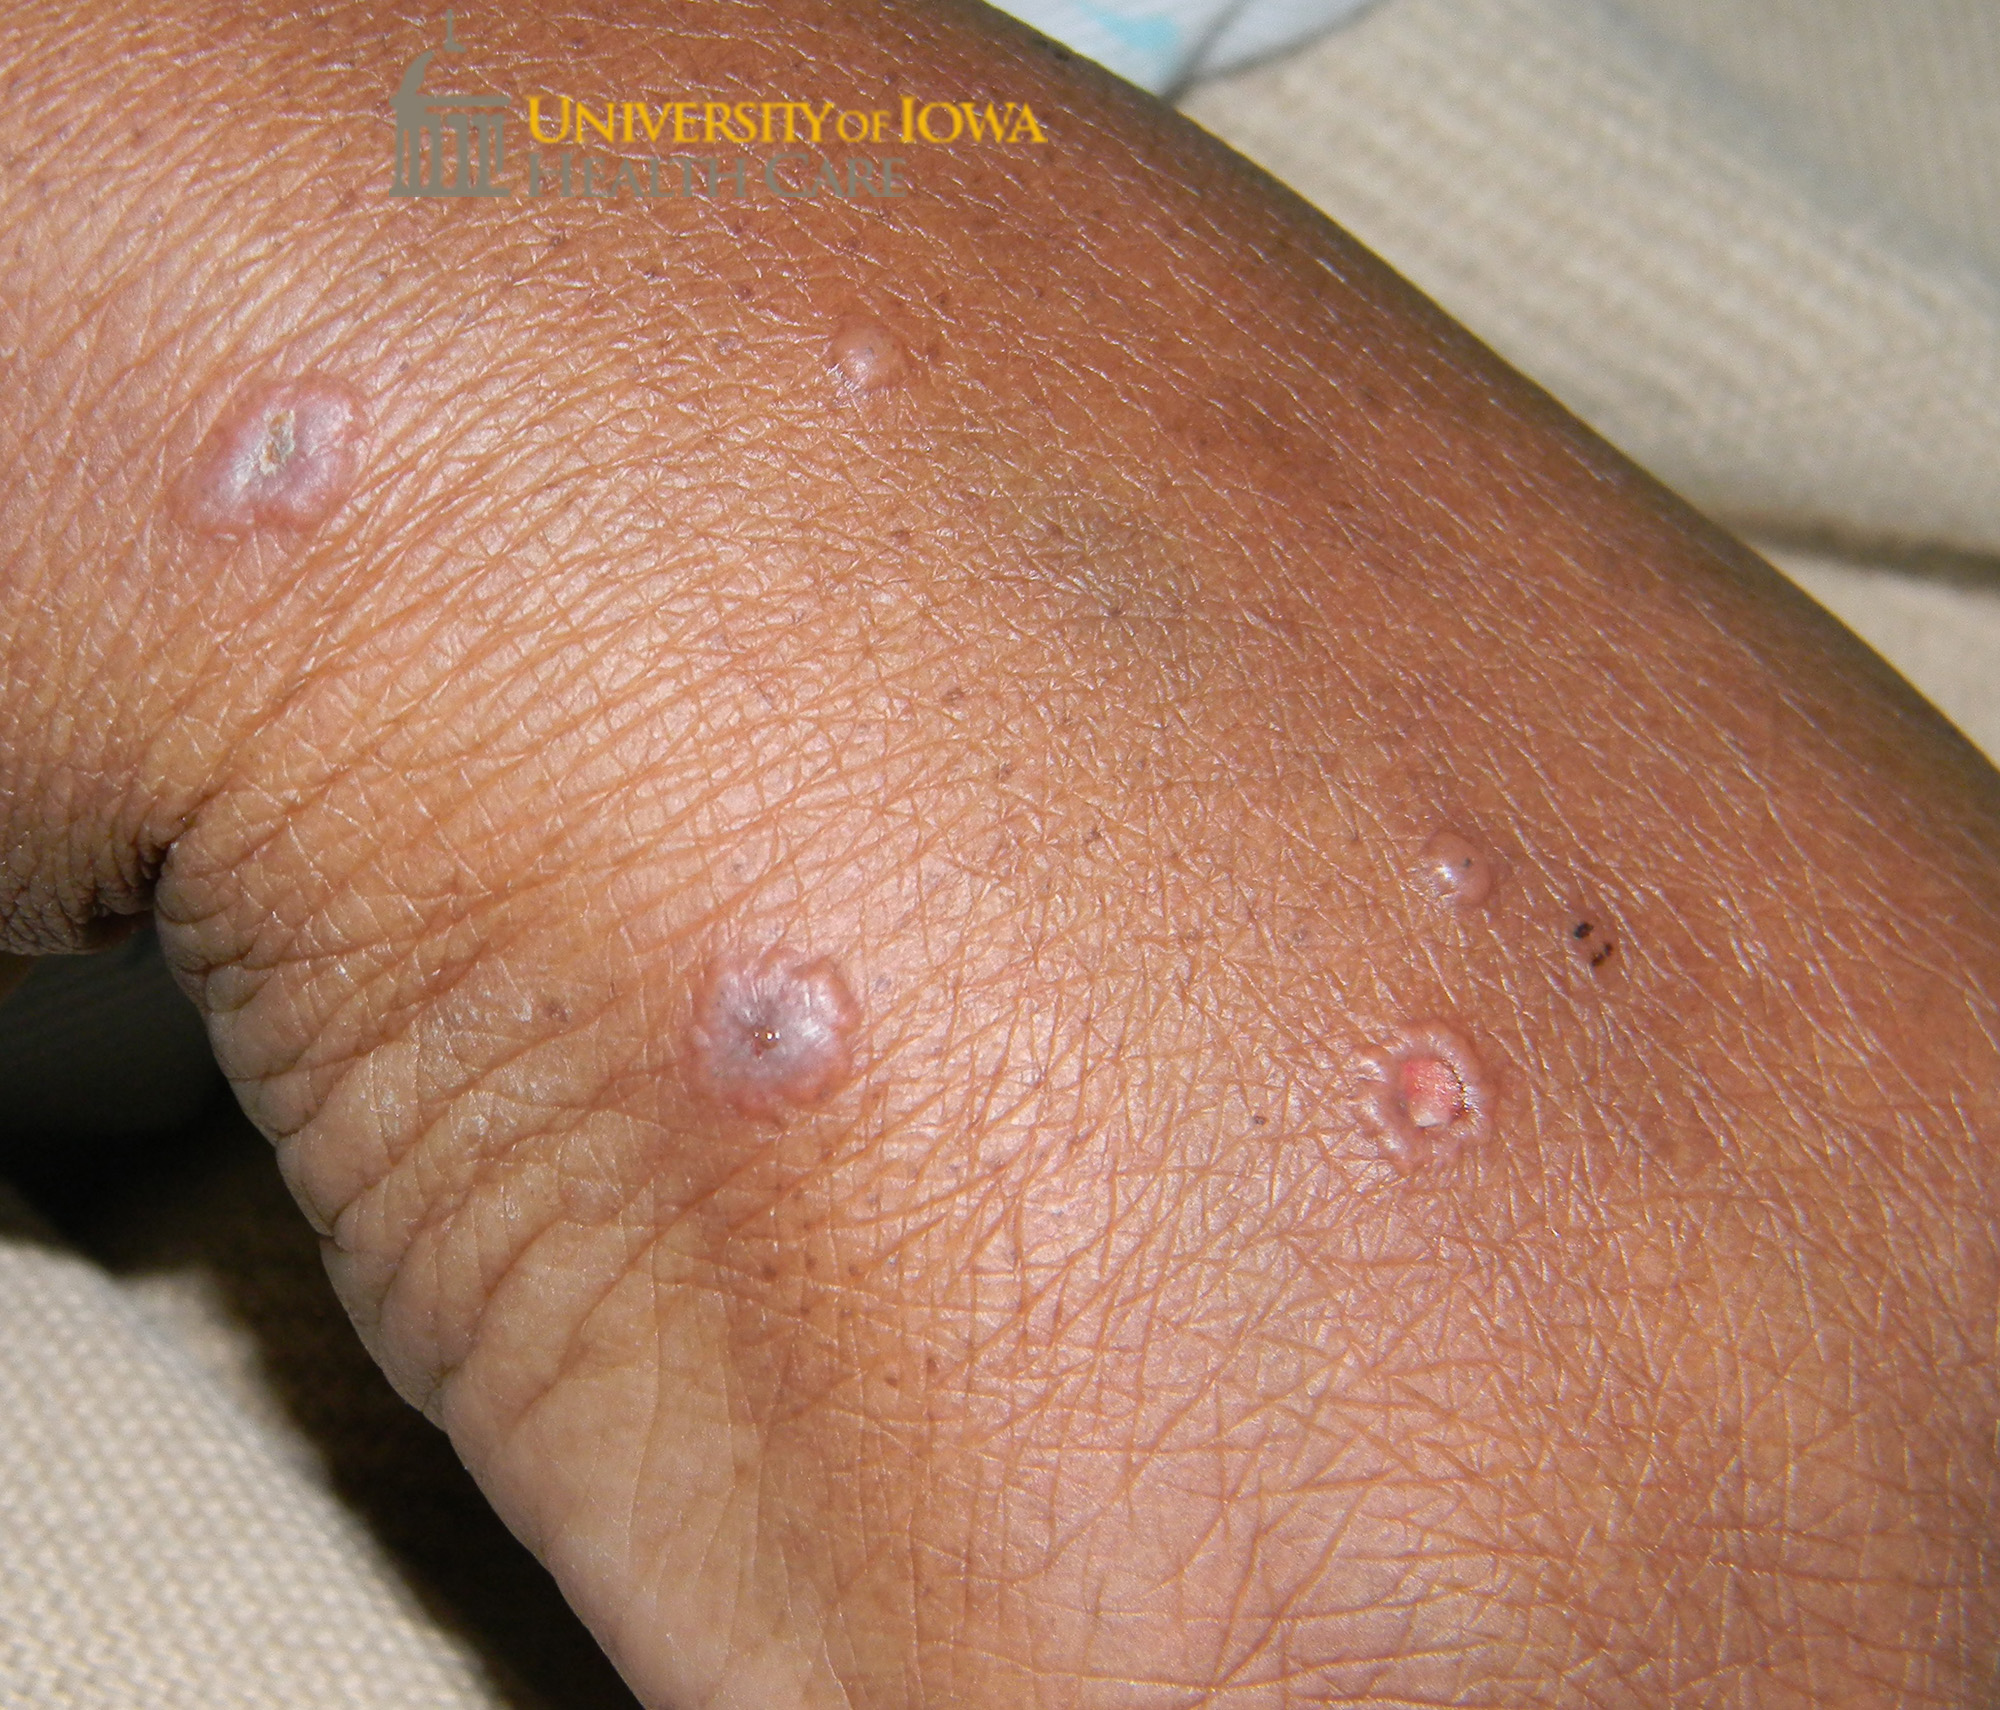 Many pink papules and vesicles, some with central erosion and umbilication . (click images for higher resolution).